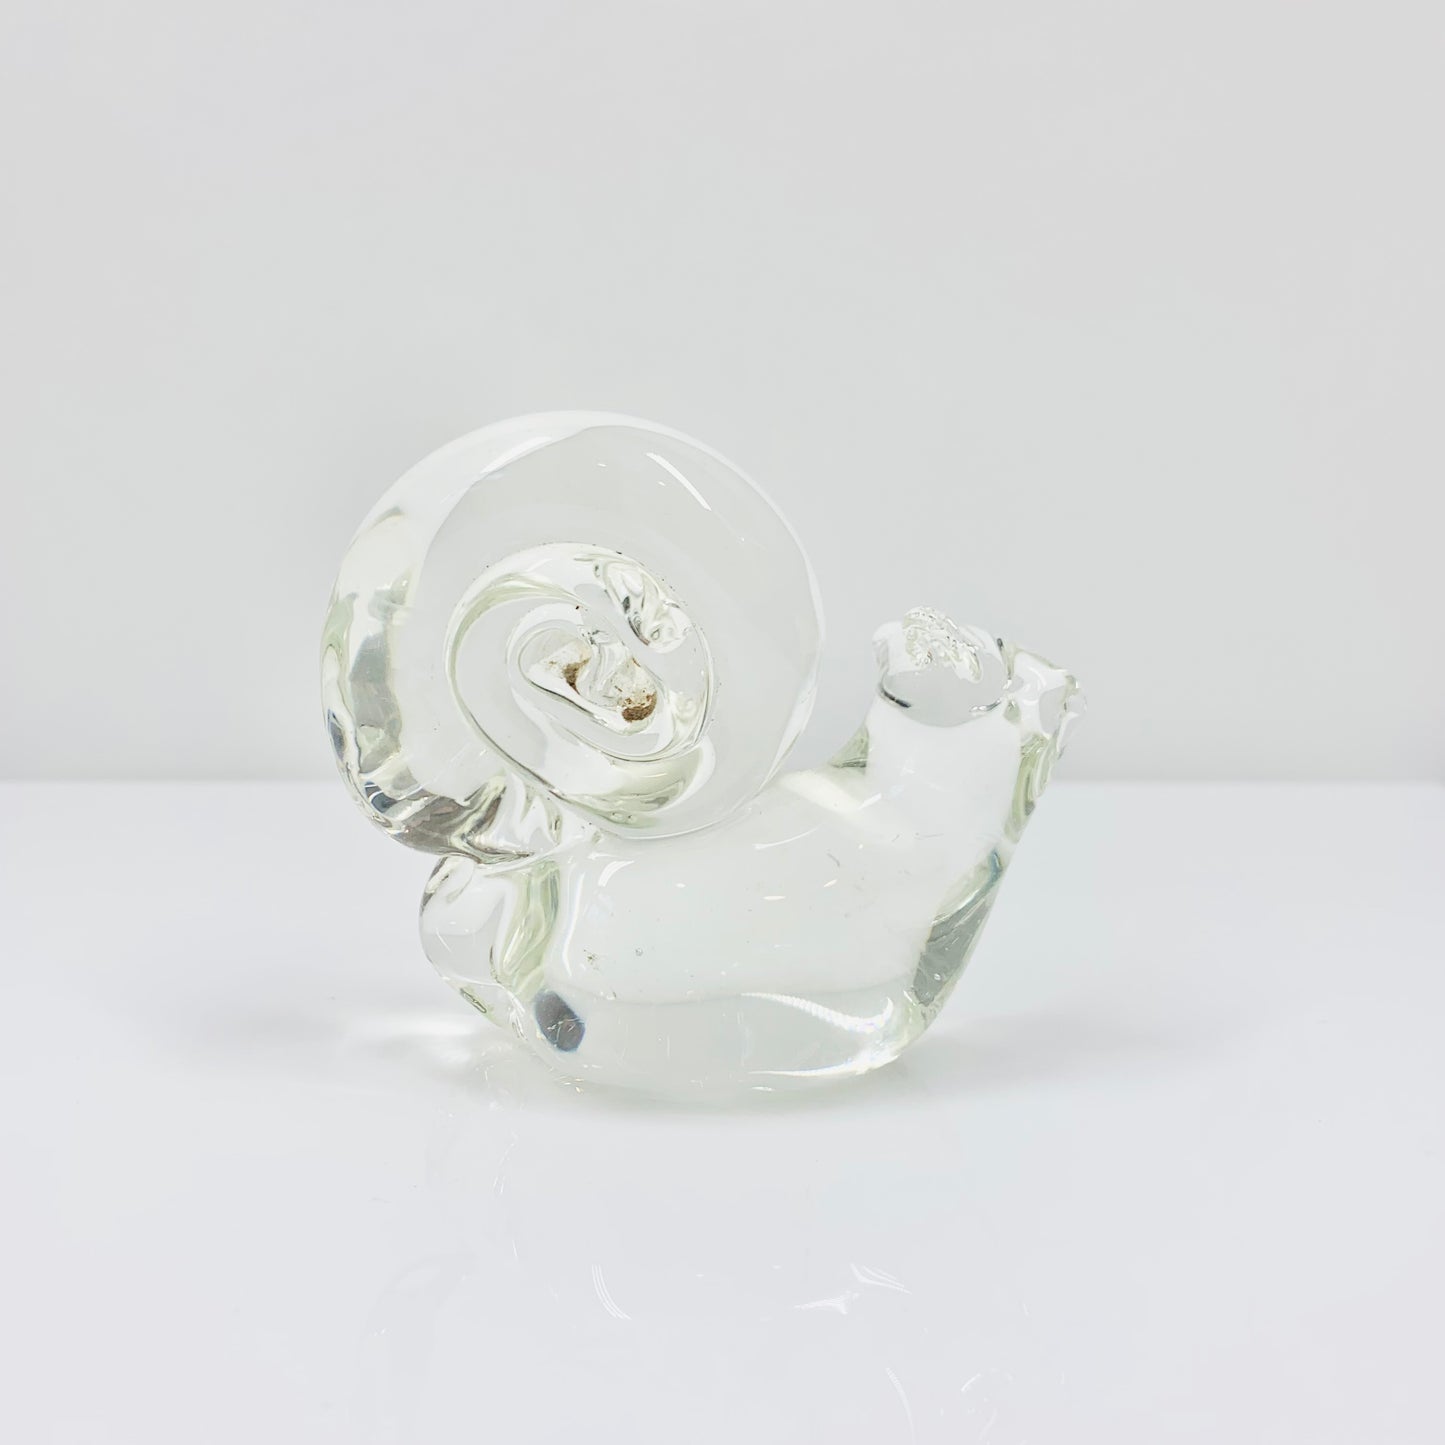 MCM hand made glass snail